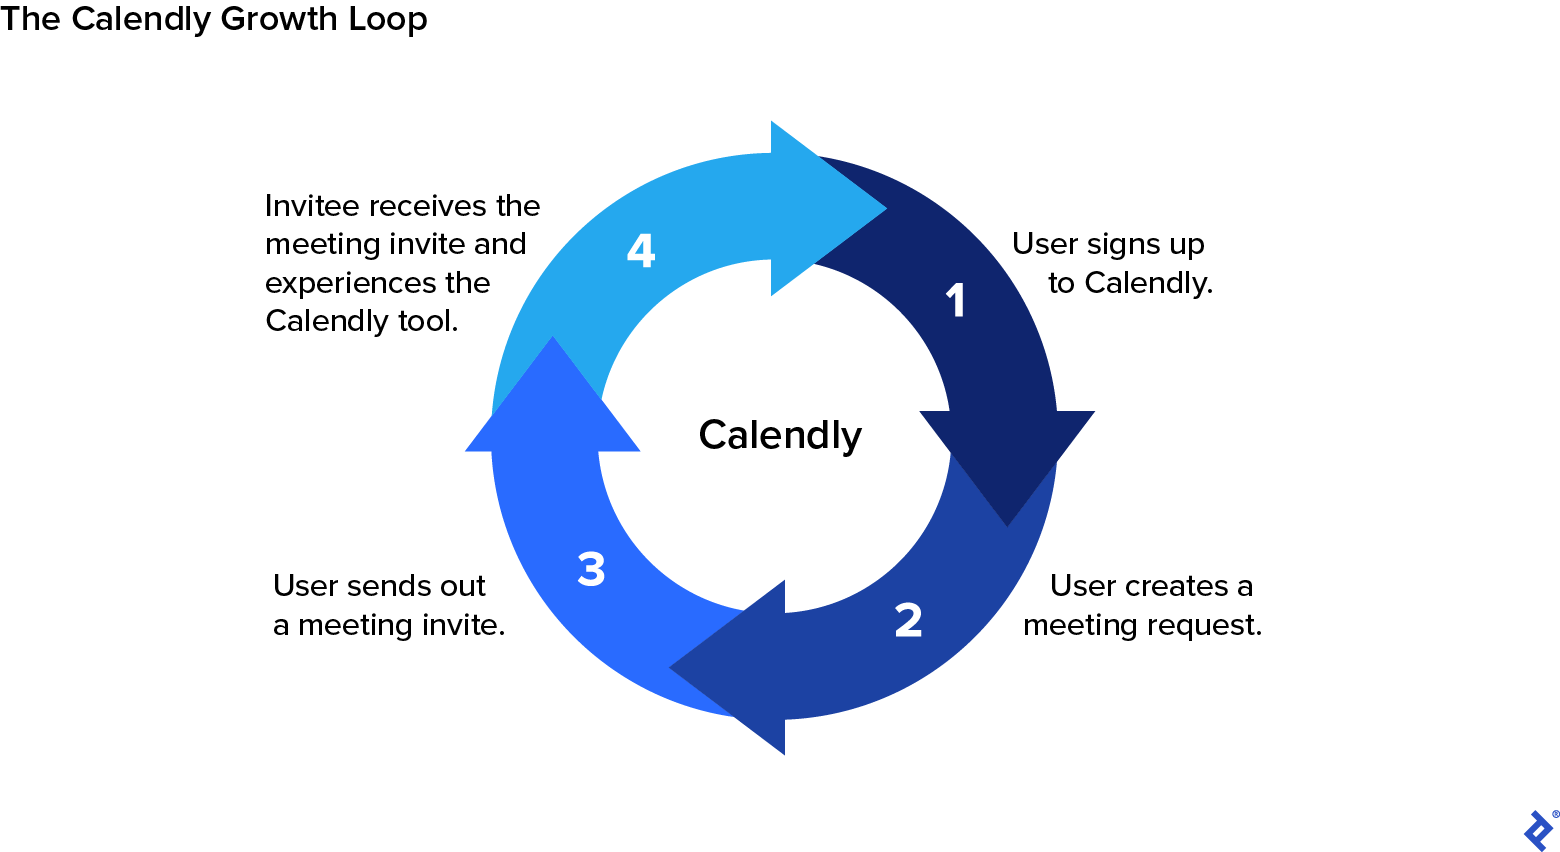 The Calendly growth loop details customer interactions with the product and how these organically increase customer sign-ups.